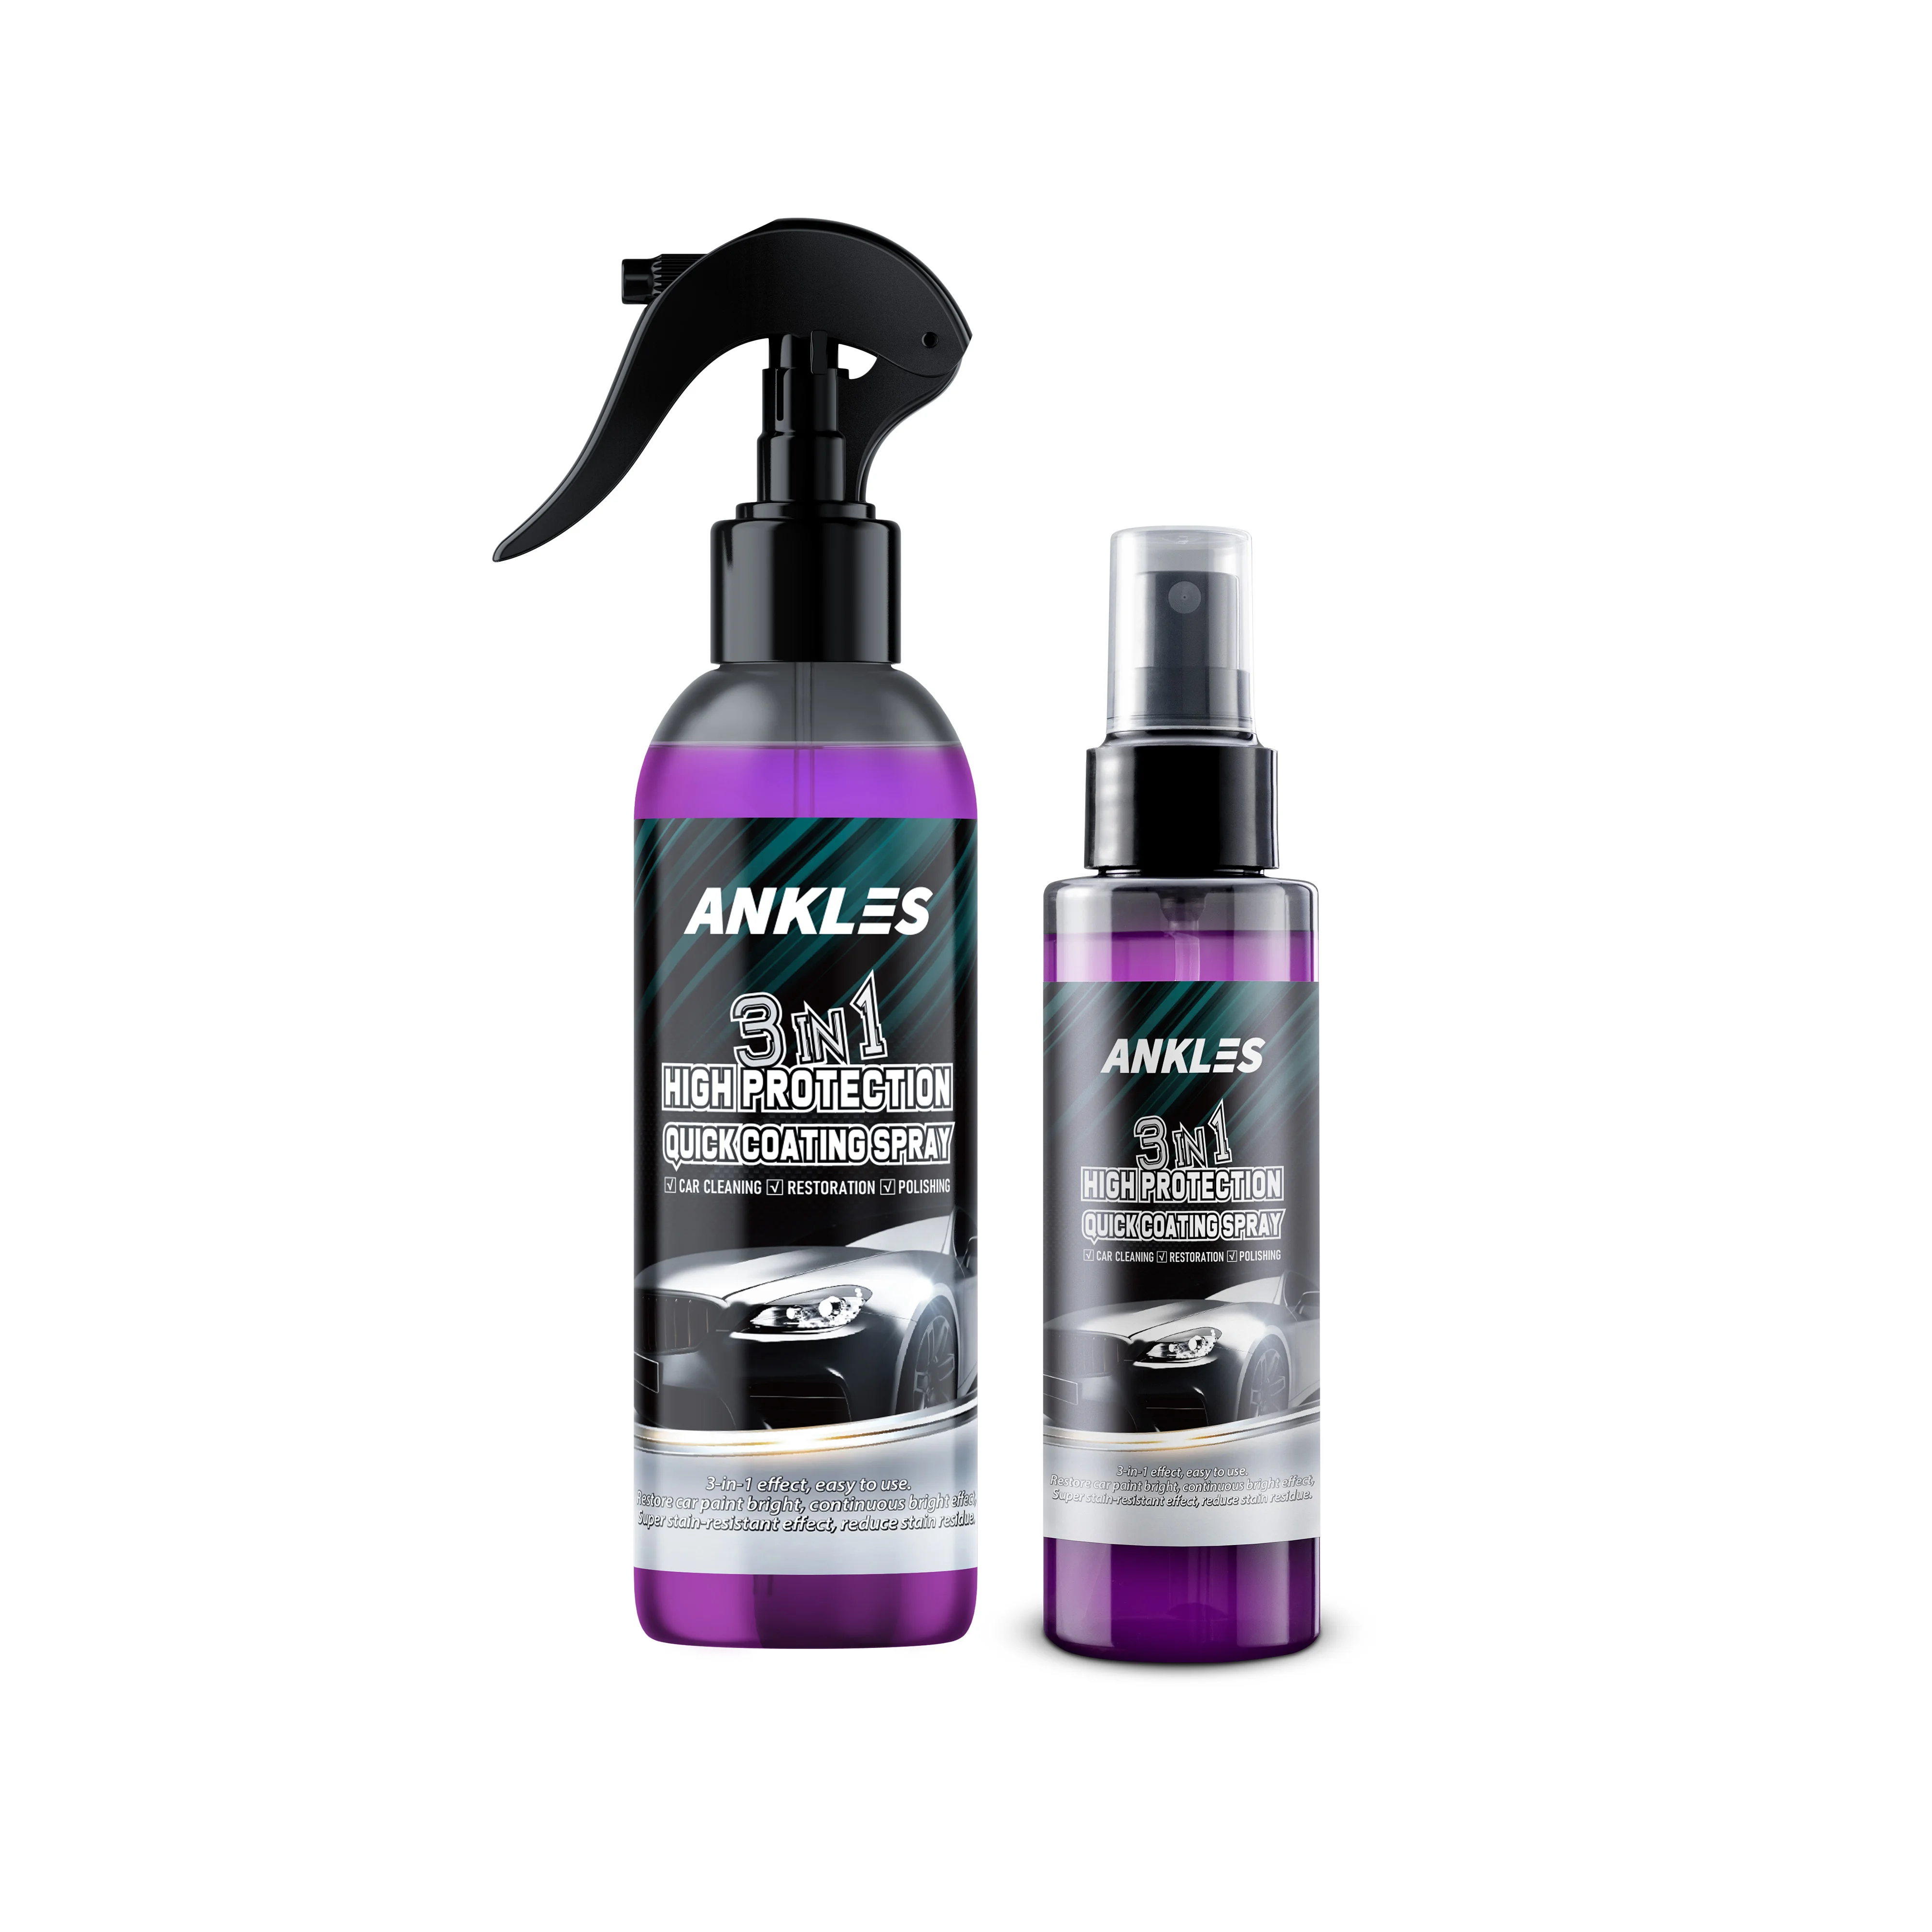 ANKLES 120ml Waterproof Polish Renew Foam Cleaner Car Coating Spray 3 in 1  High Protection Quick Coating Spray